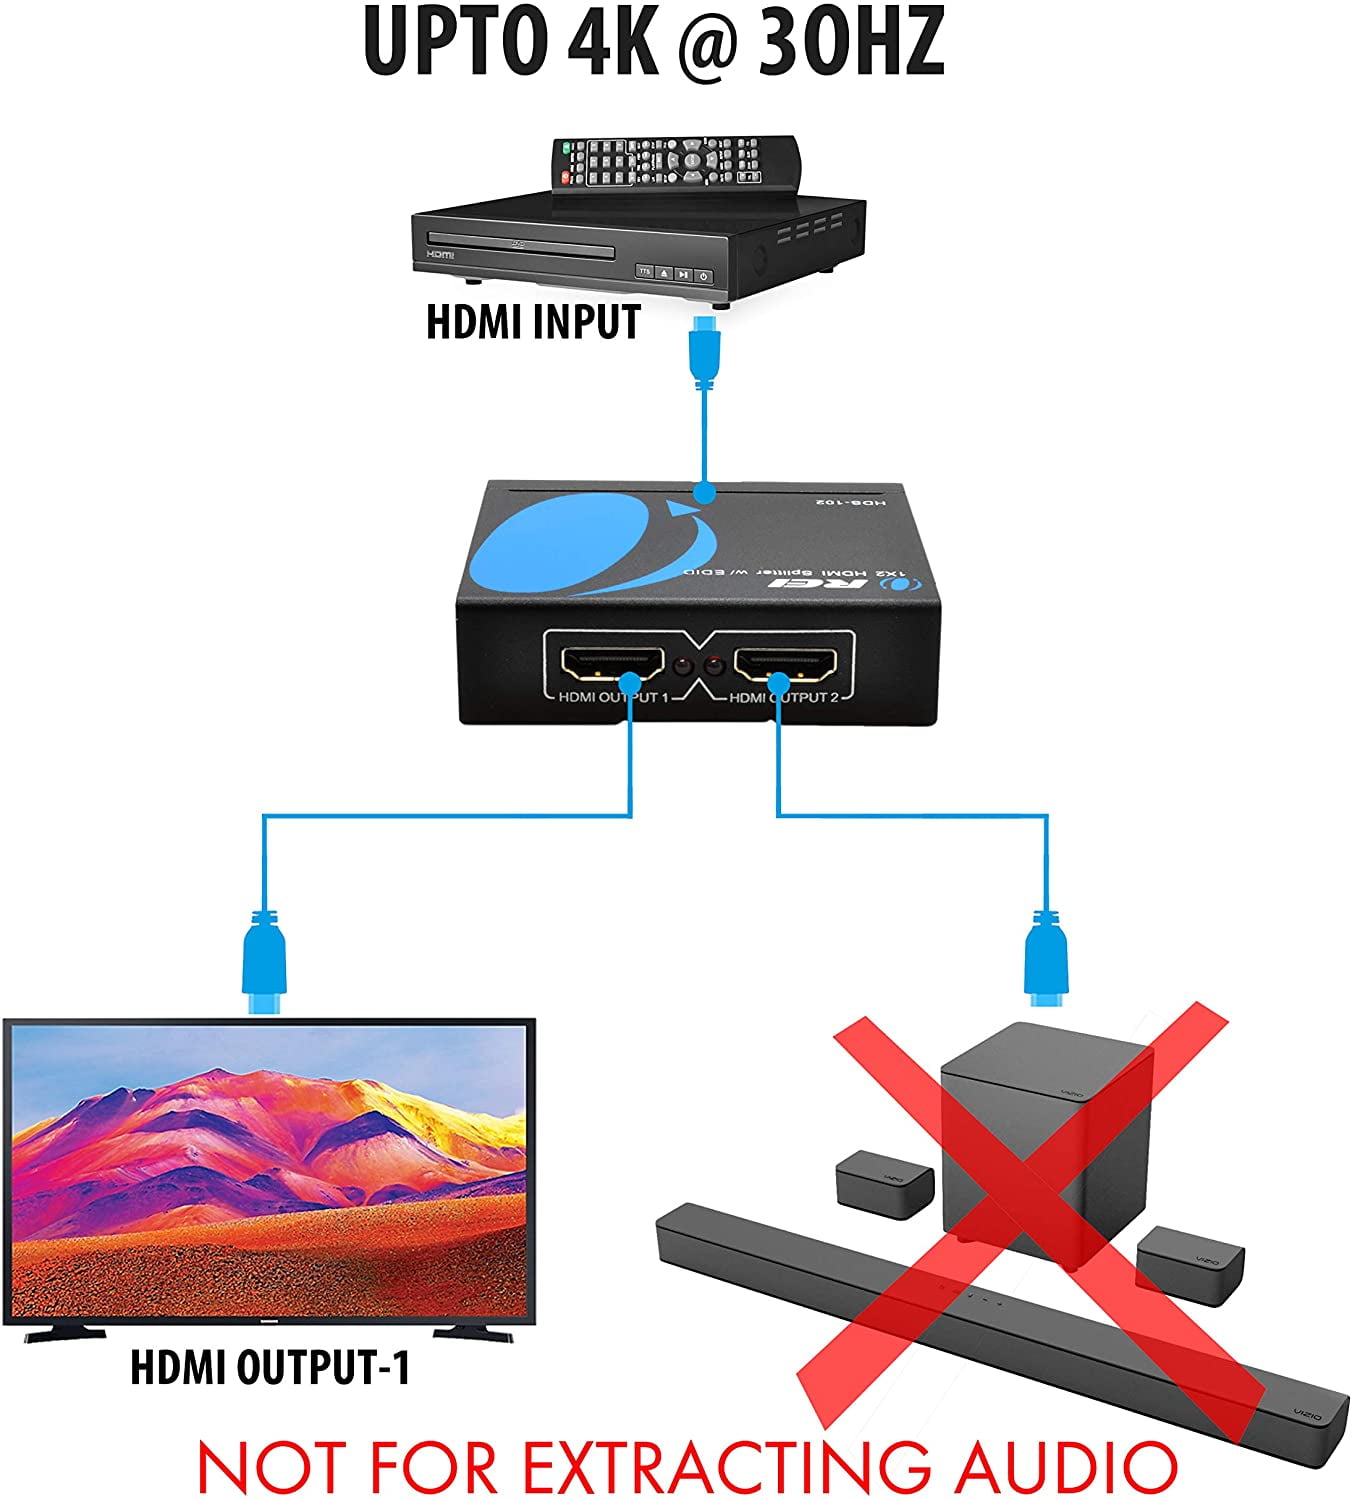 OREI HD-102 HDMI Splitter 1-In 2-Out, USB Powered, EDID, 3D Support · AVGear